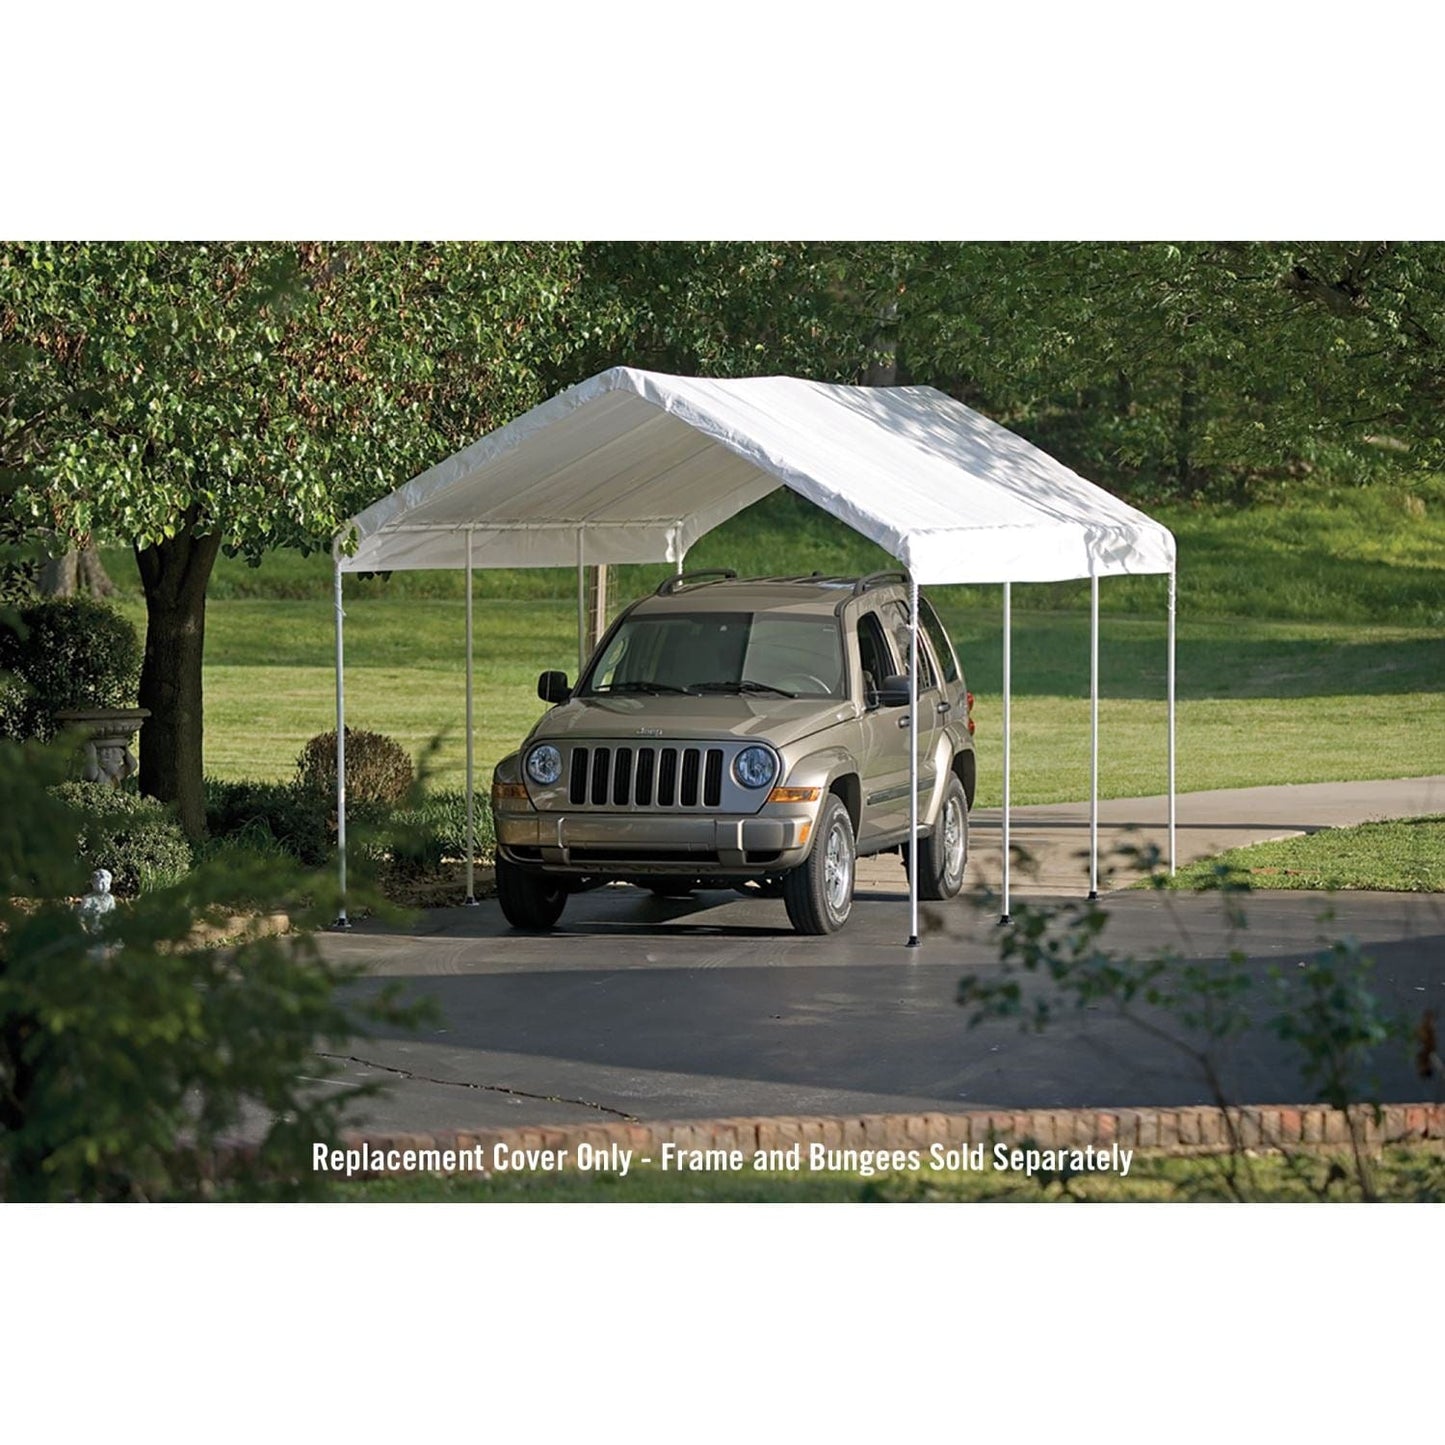 ShelterLogic Canopy Cover Kit ShelterLogic | Canopy Replacement Top - MaxAP 10 x 20 ft 10072